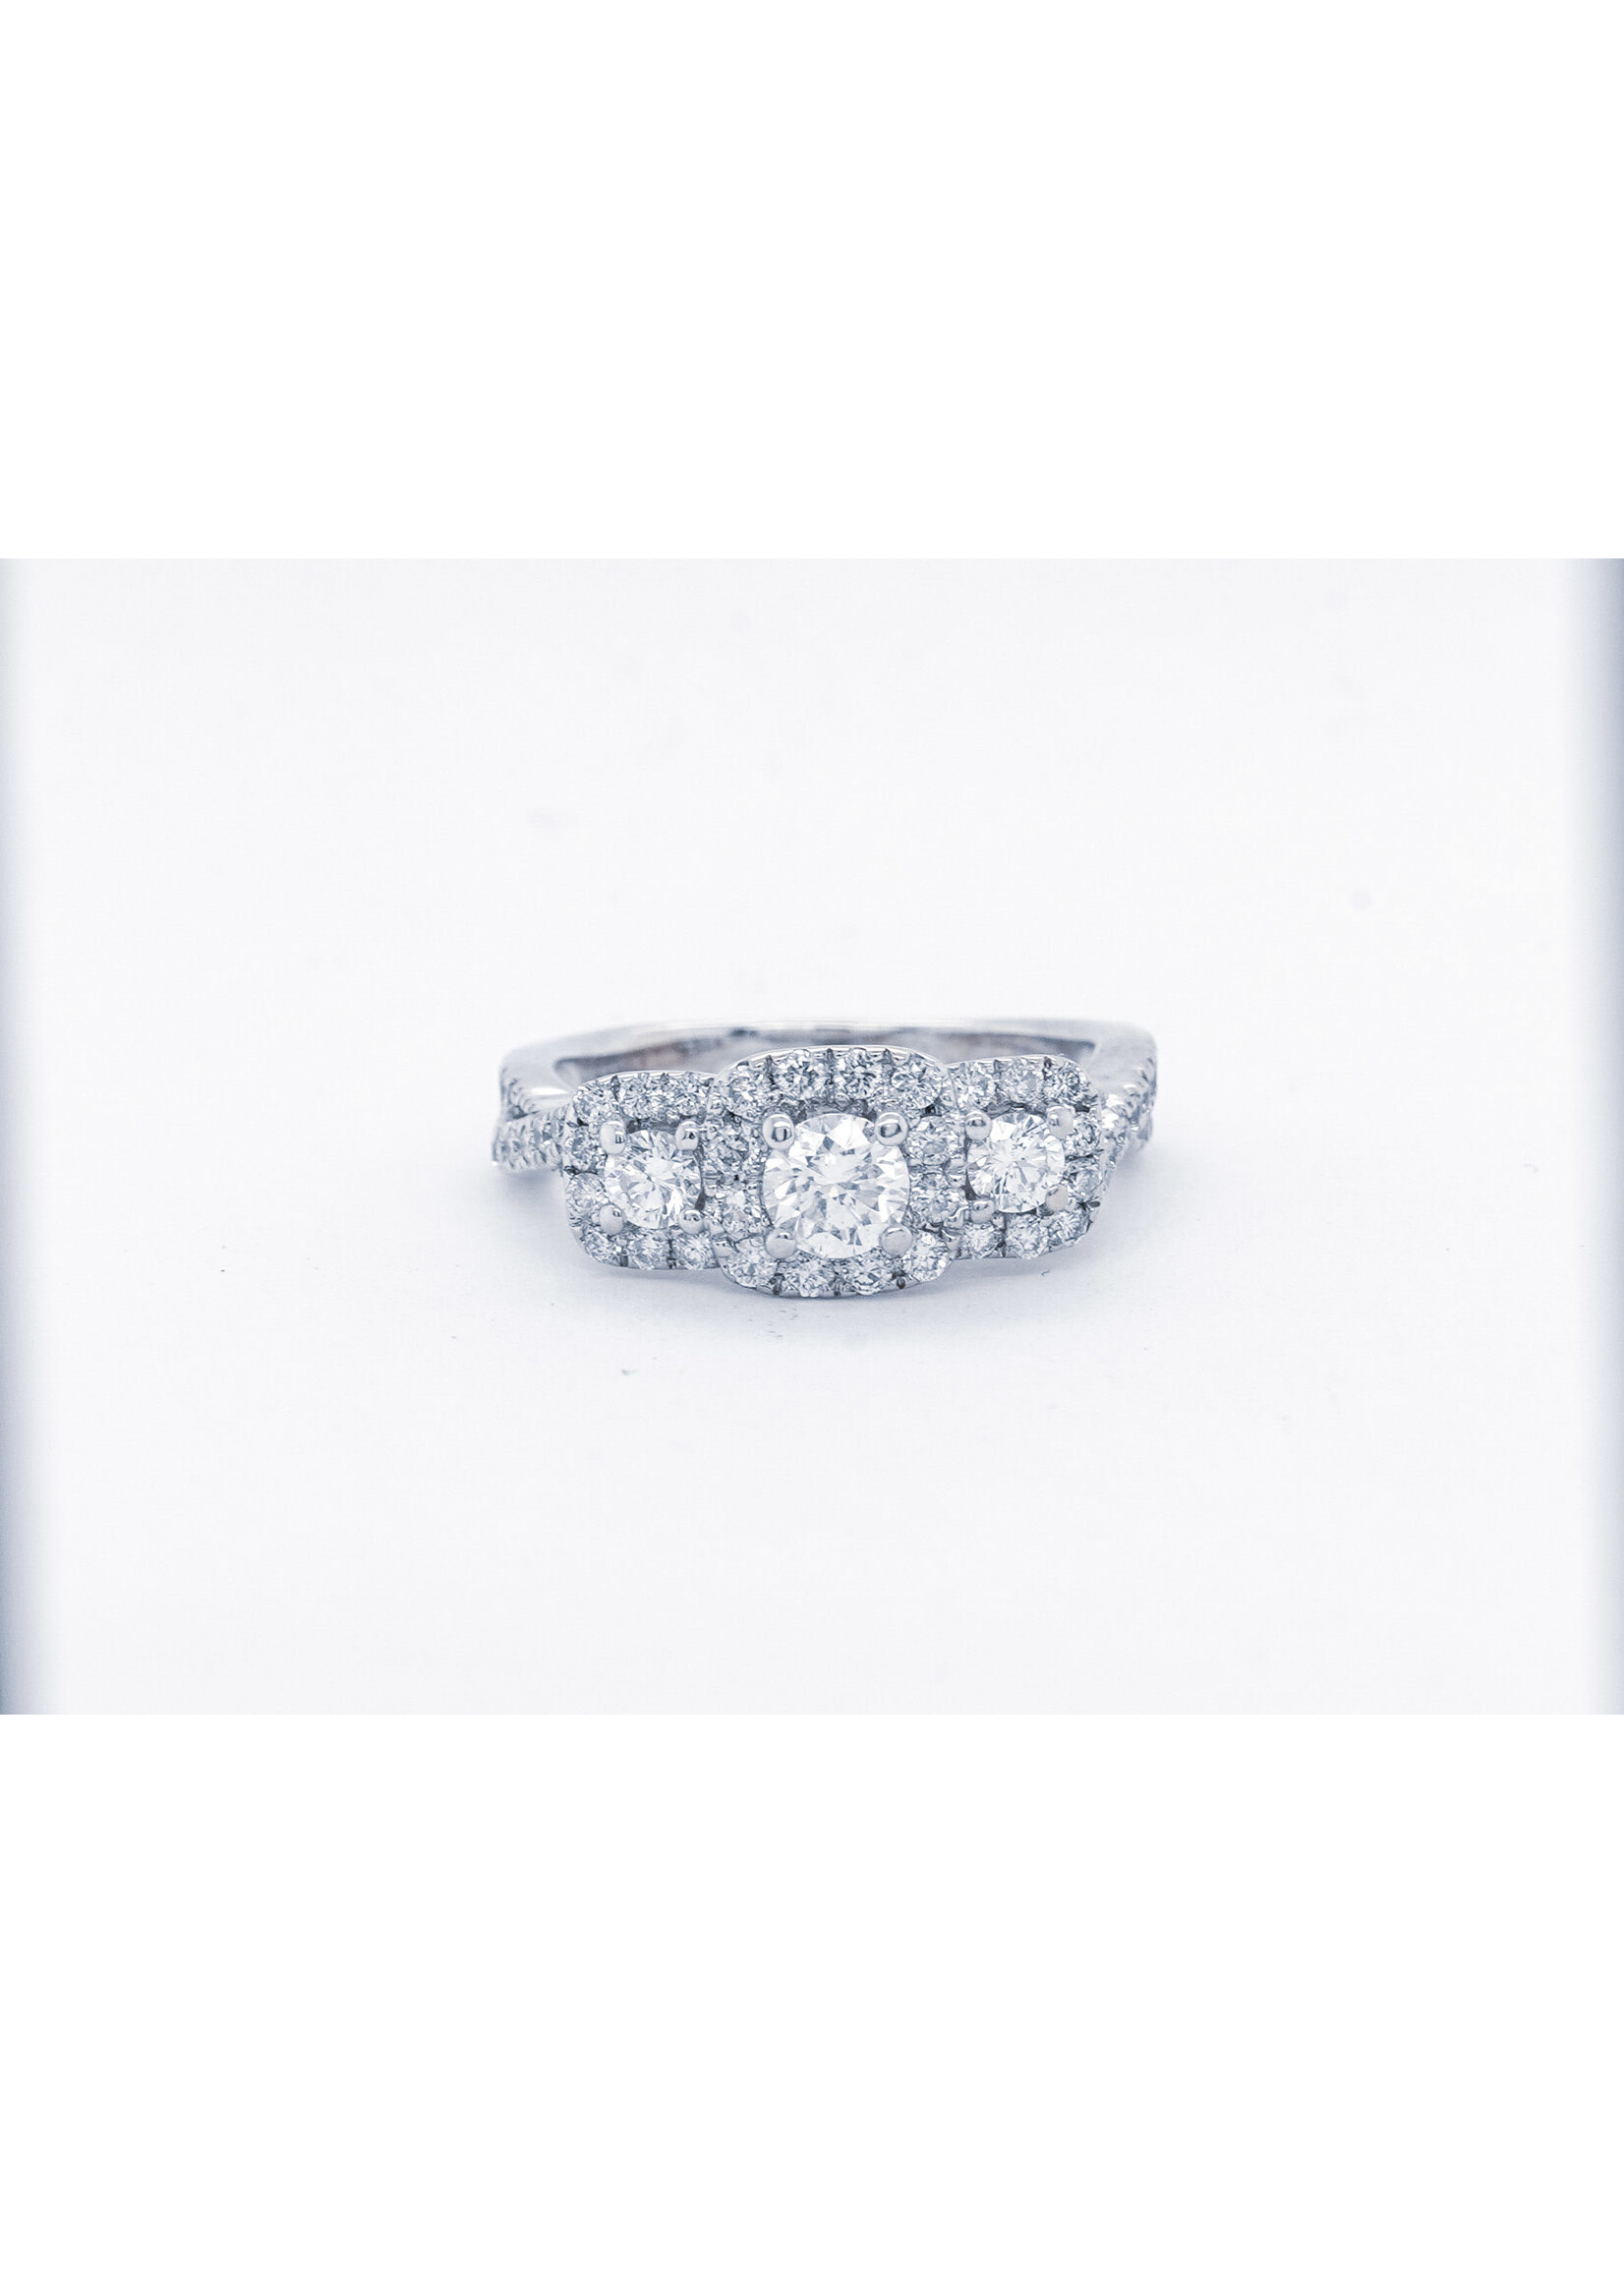 14KW 4.3g 1.00tw (.30ctr) H/SI2  Vera Wang Diamond Halo Engagement Ring (size 4.75)